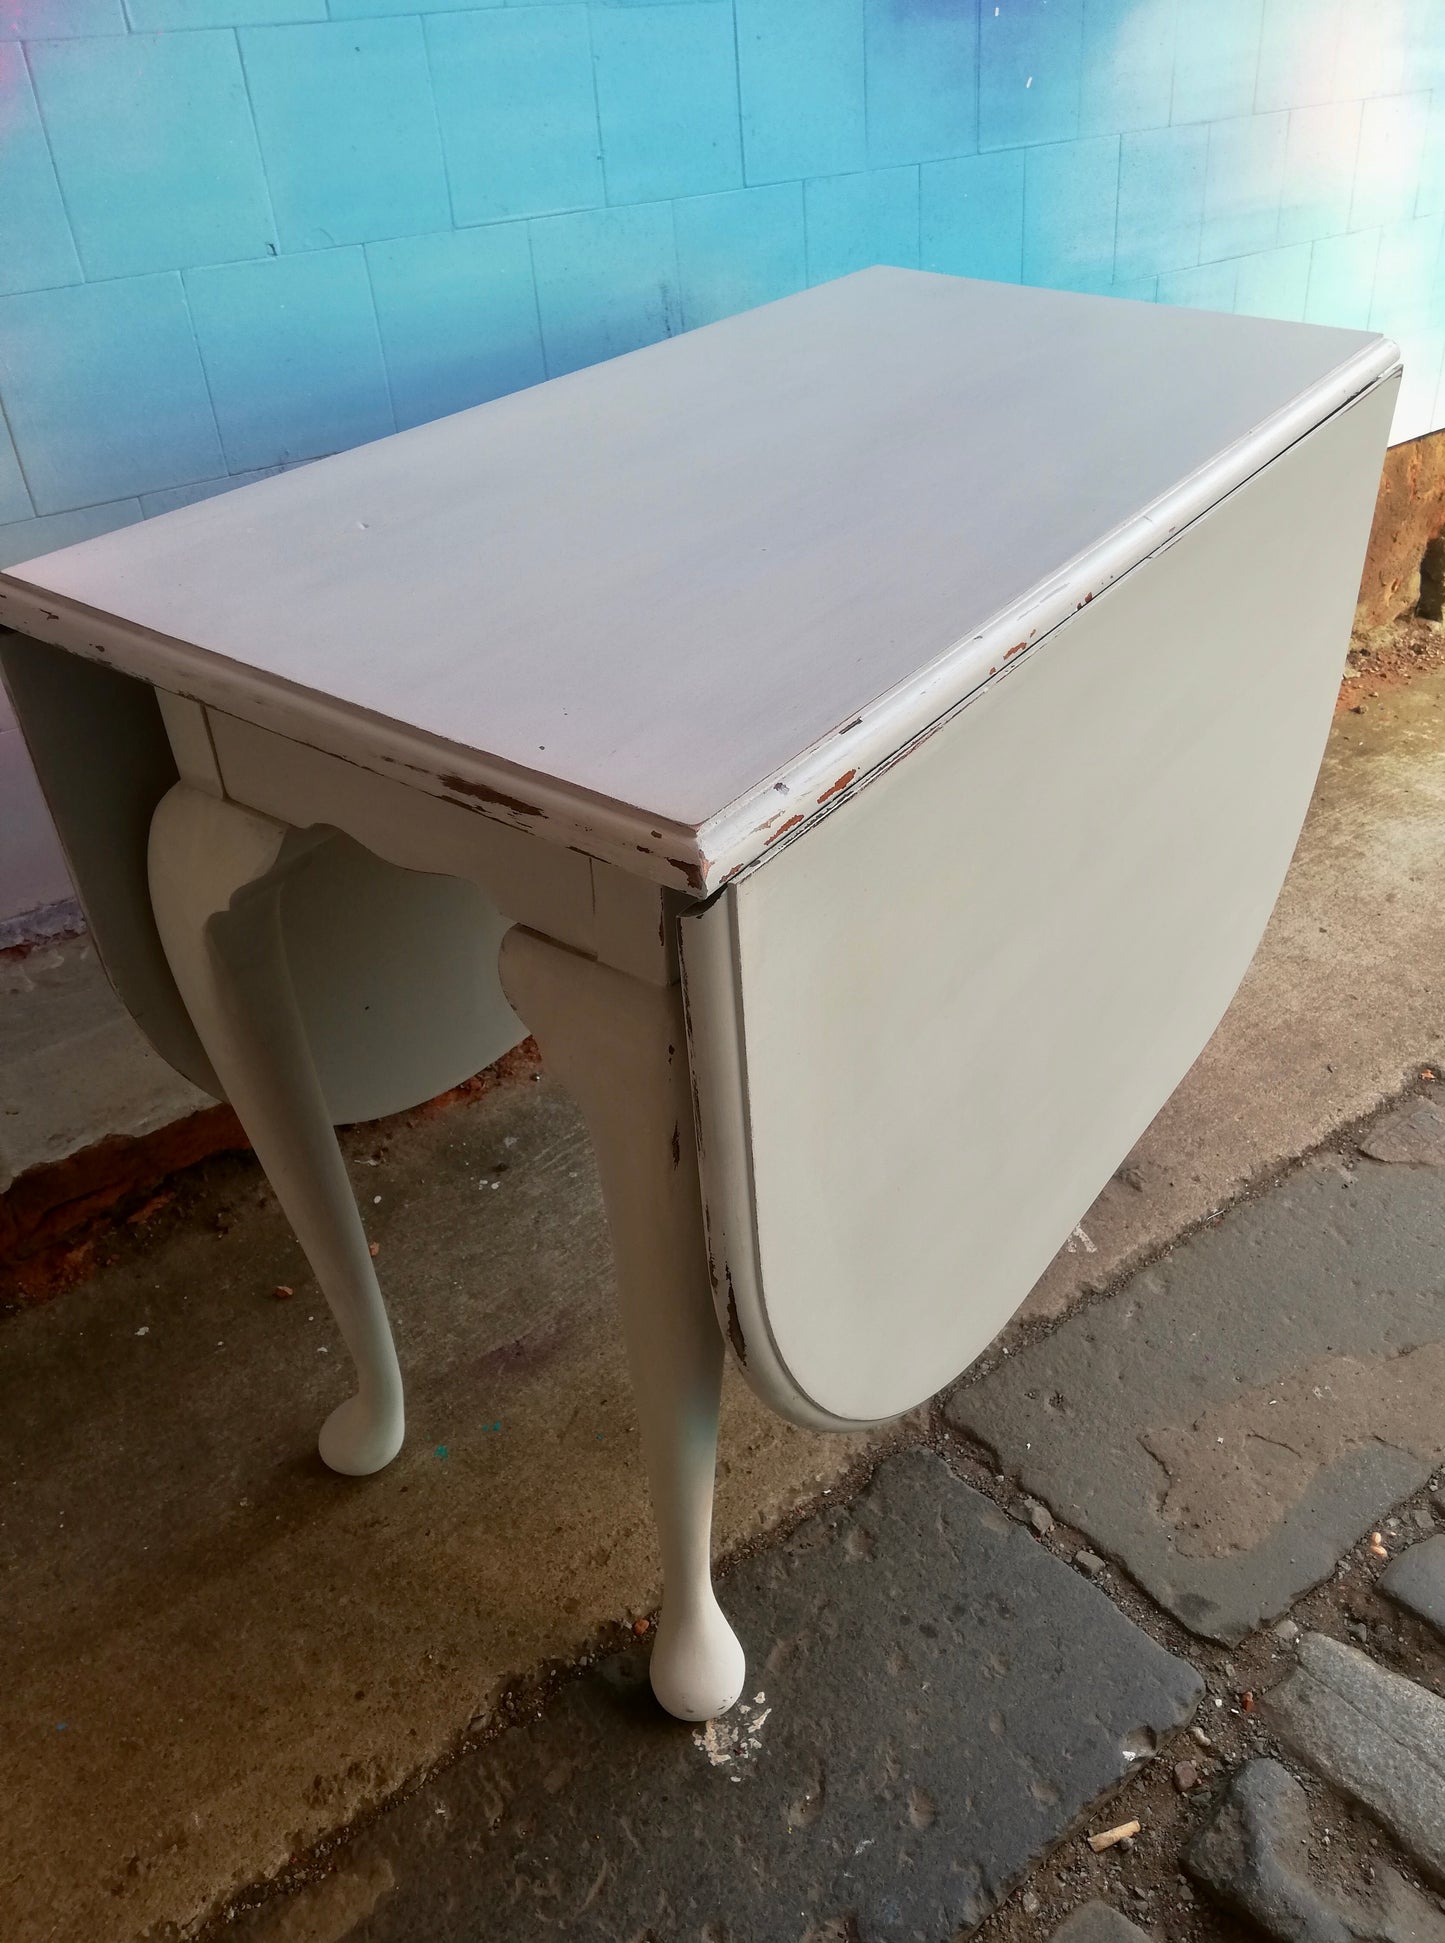 Commission for Joanne Large Vintage drop-leaf table painted in layers of Milk Paint